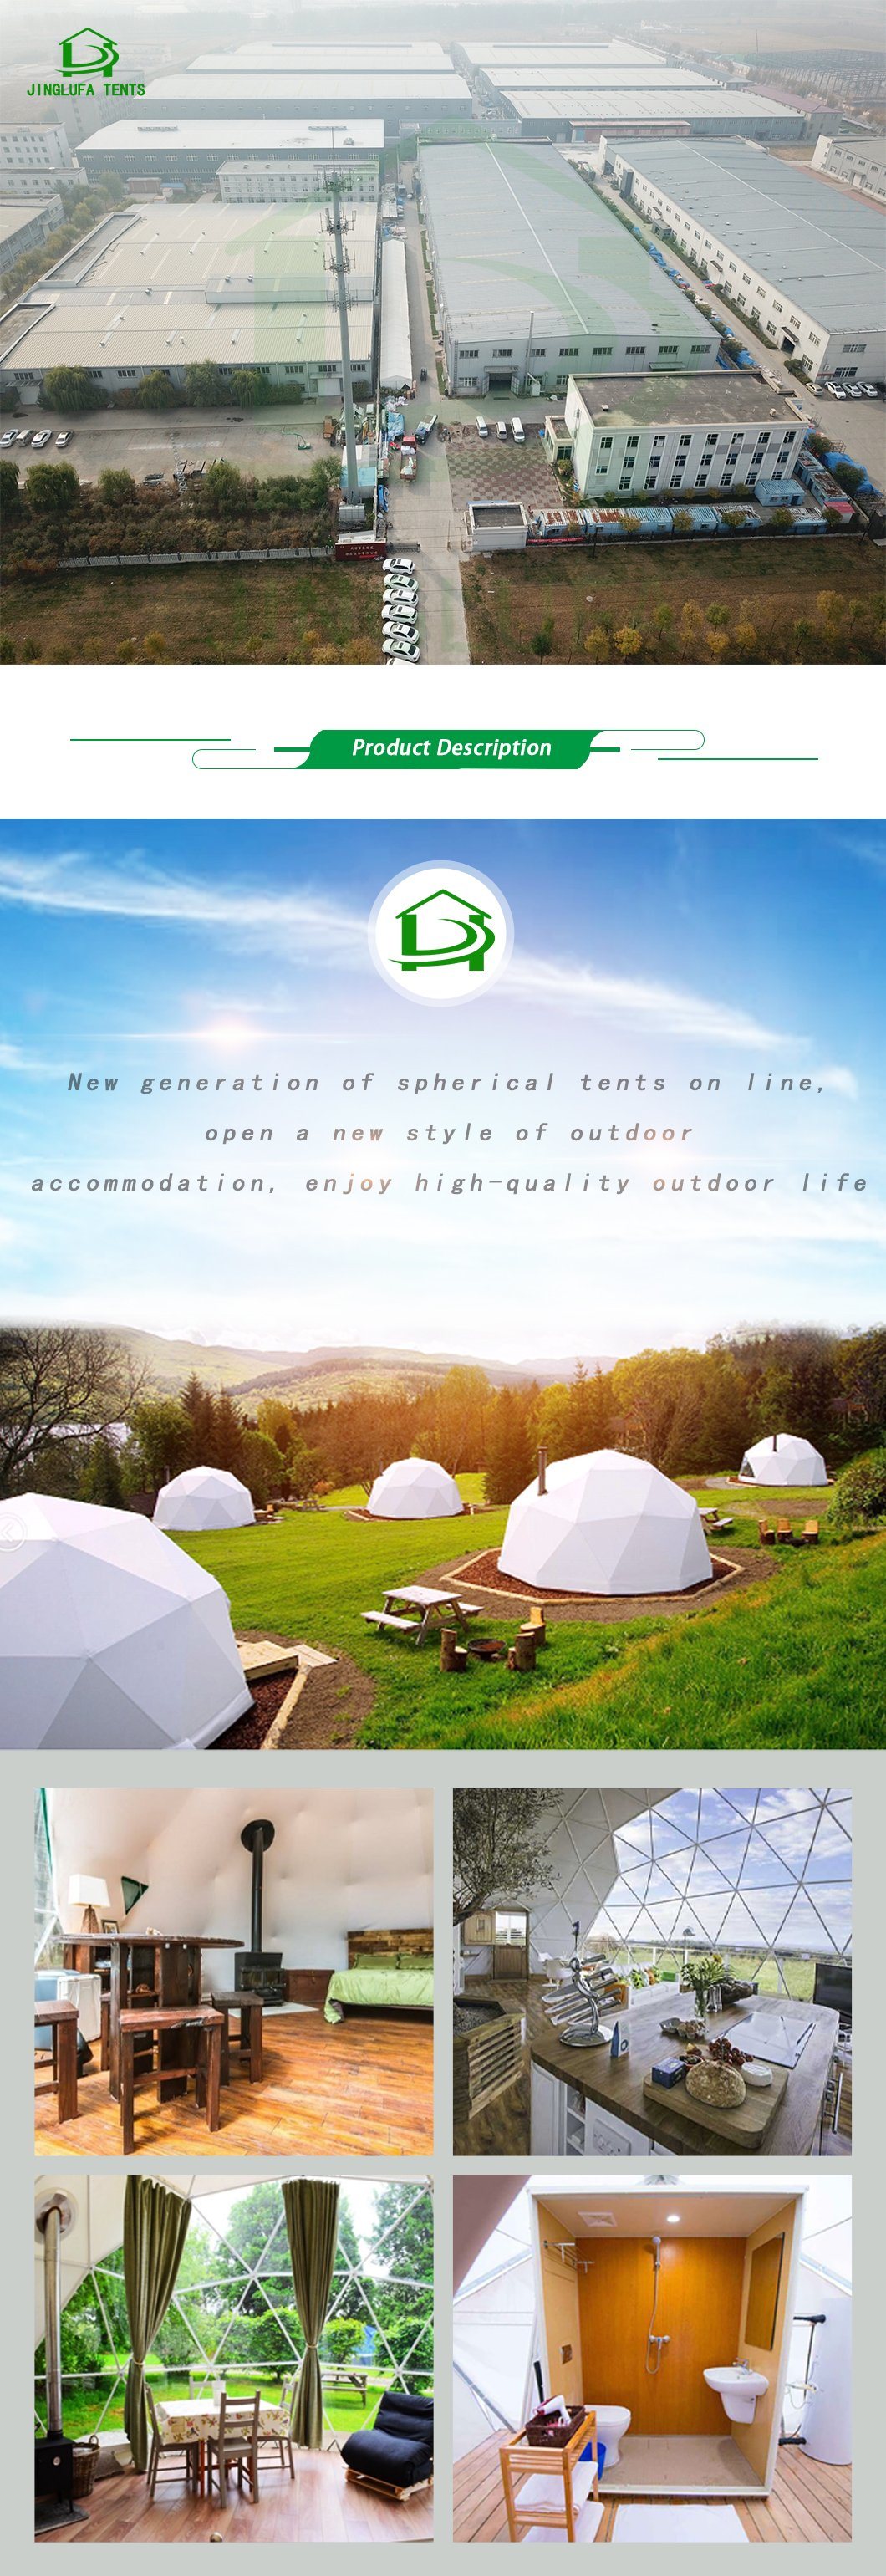 6m Geodesic Dome Waterproof Glamping Tent